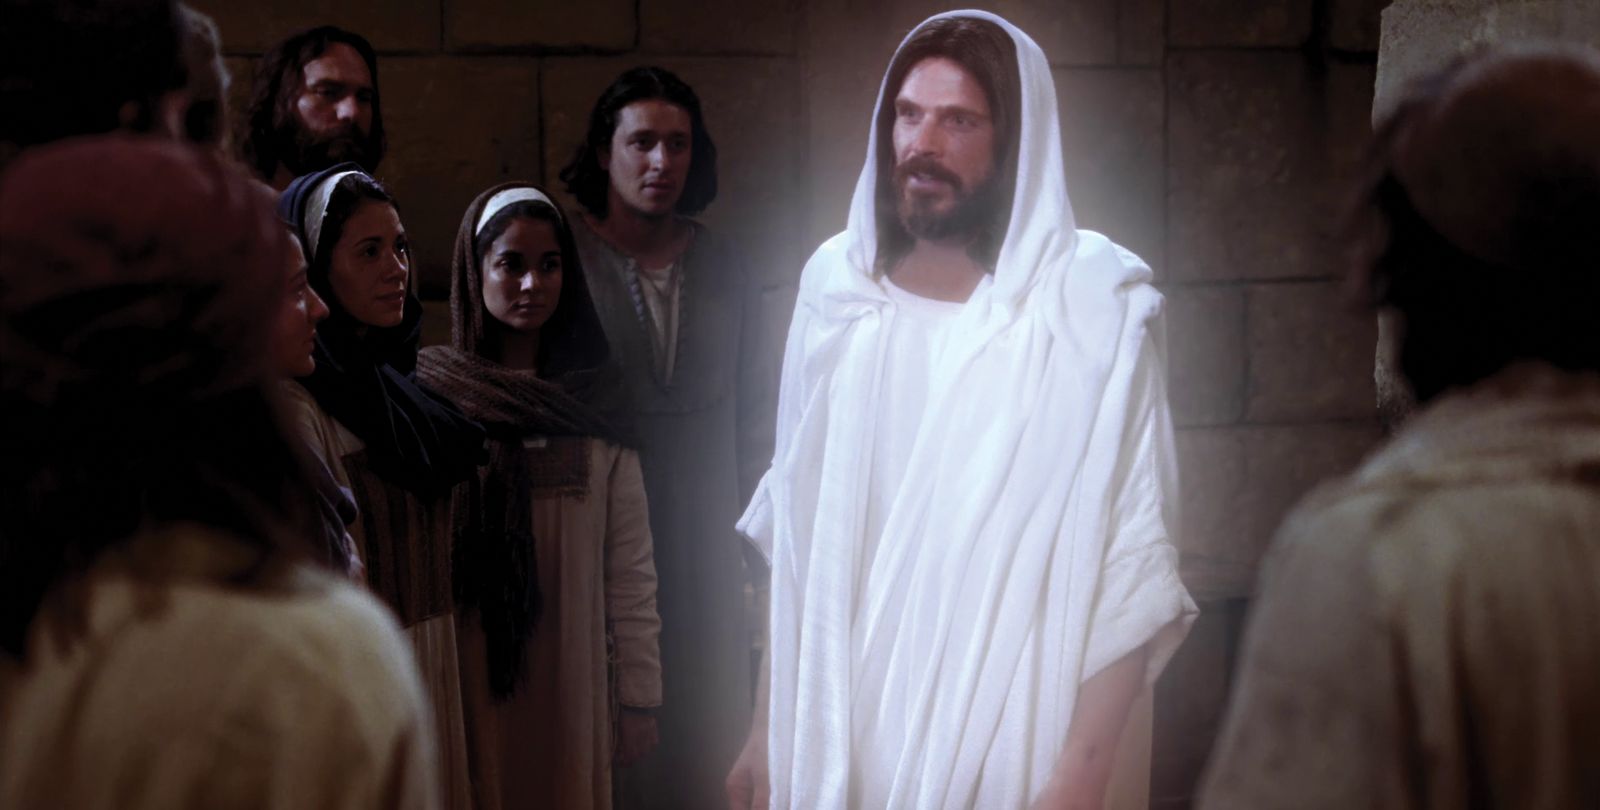 Jesus Christ, now resurrected, approaches His Apostles and others.